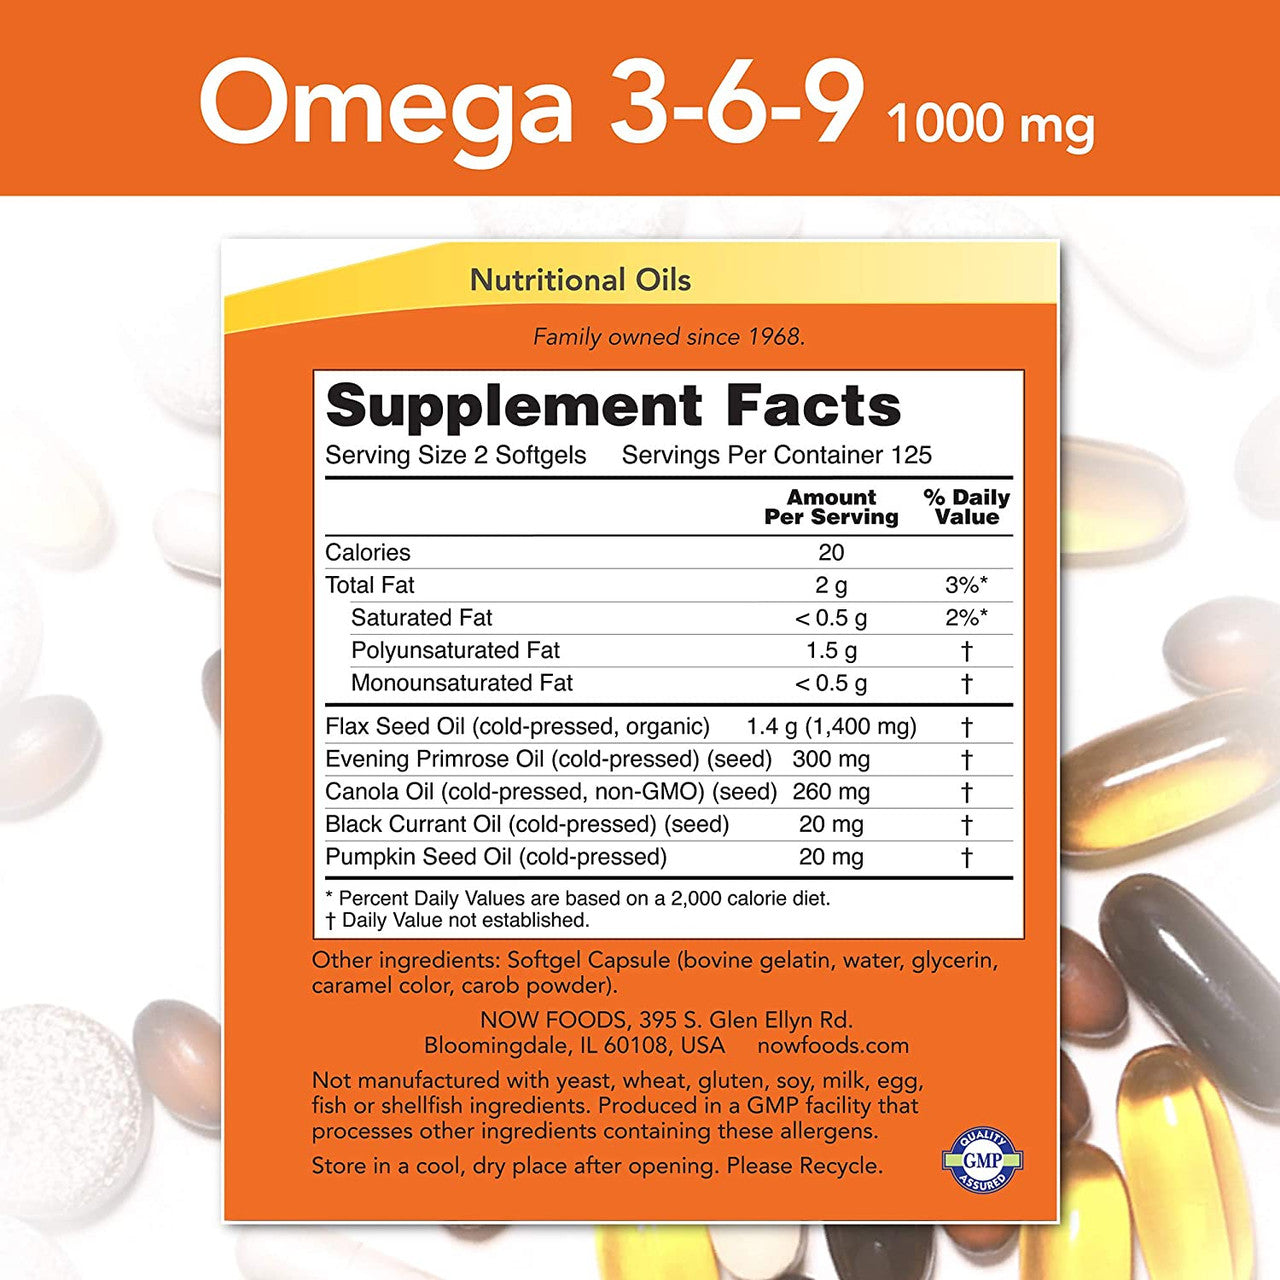 Now Omega 3-6-9 supplement facts